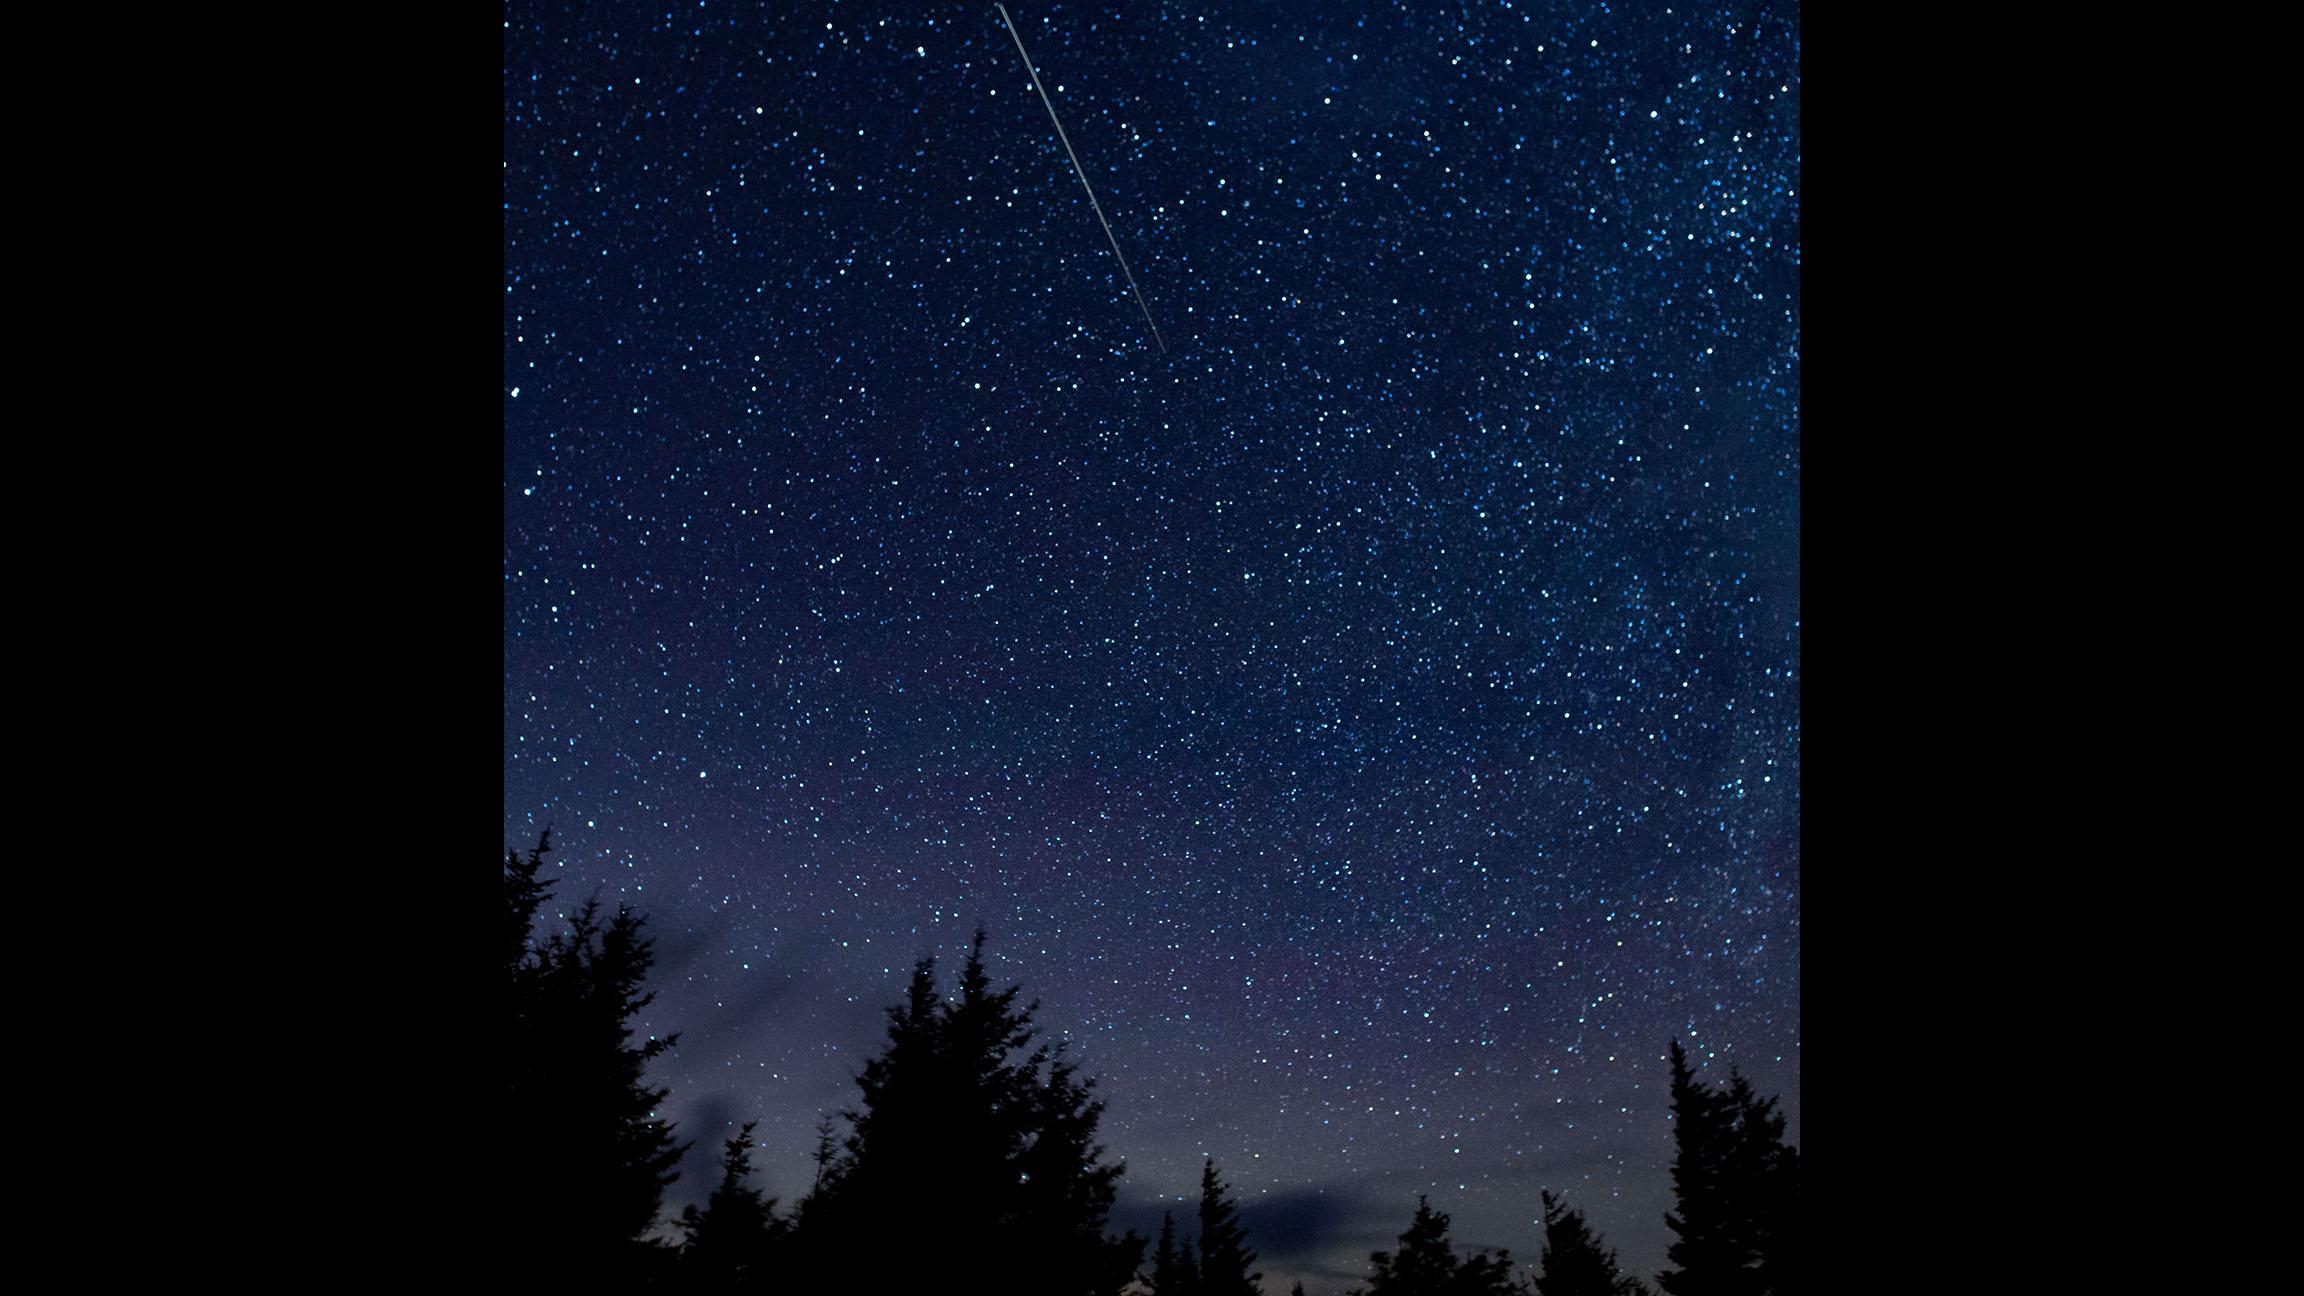 In this 30-second exposure, a meteor streaks across the sky during the annual Perseid meteor shower on Thursday, Aug. 13, 2015, in Spruce Knob, West Virginia. (NASA / Bill Ingalls)